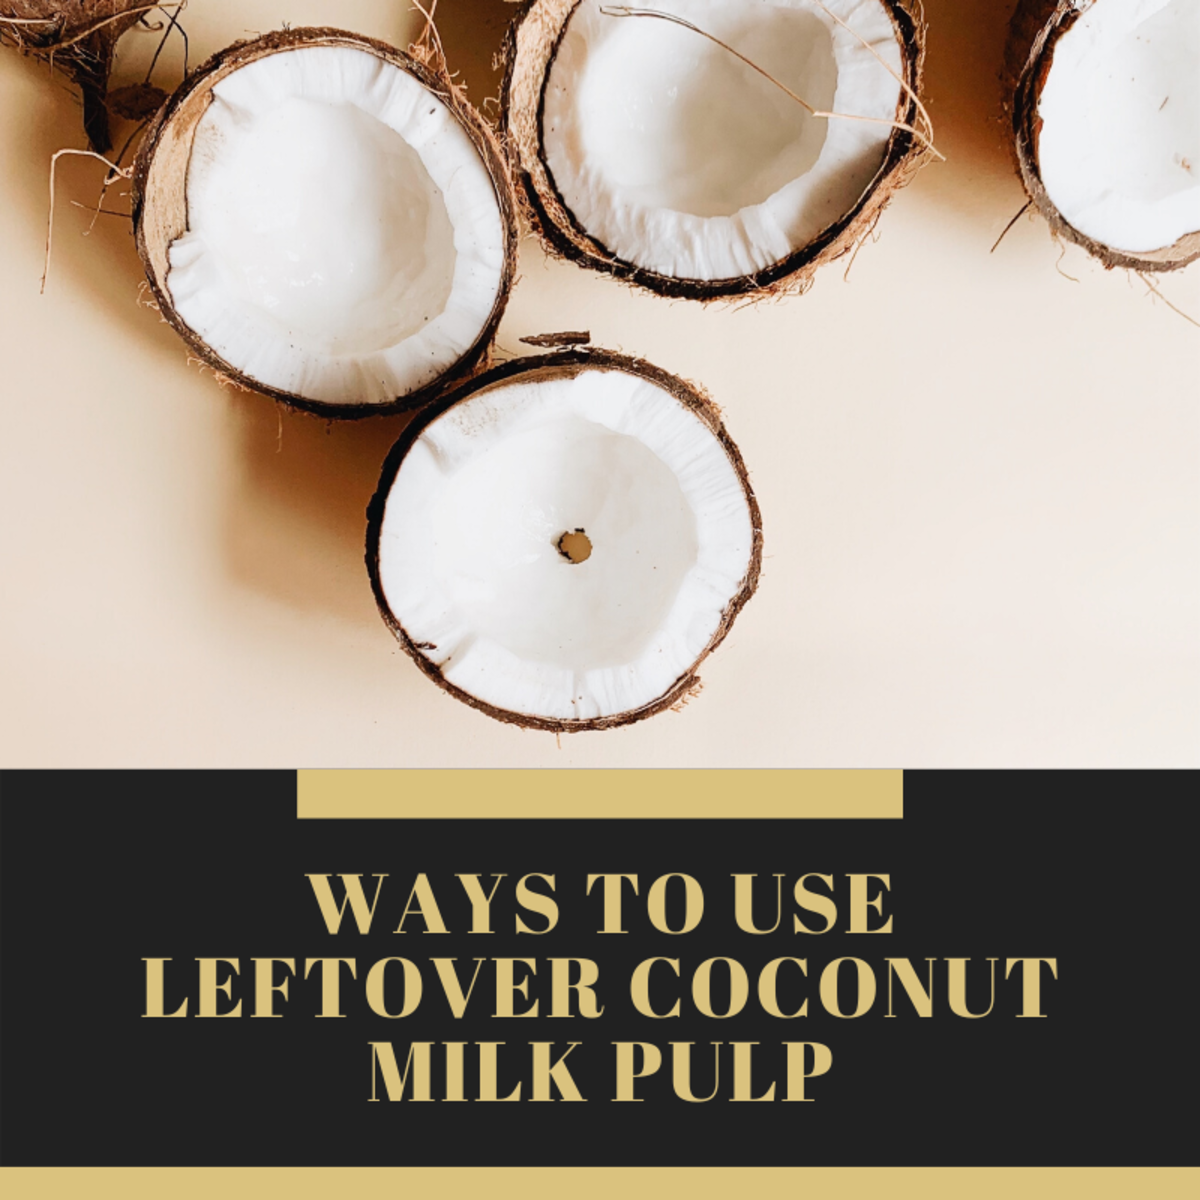 5 Ways to Use Leftover Coconut Milk Pulp and How to Store It